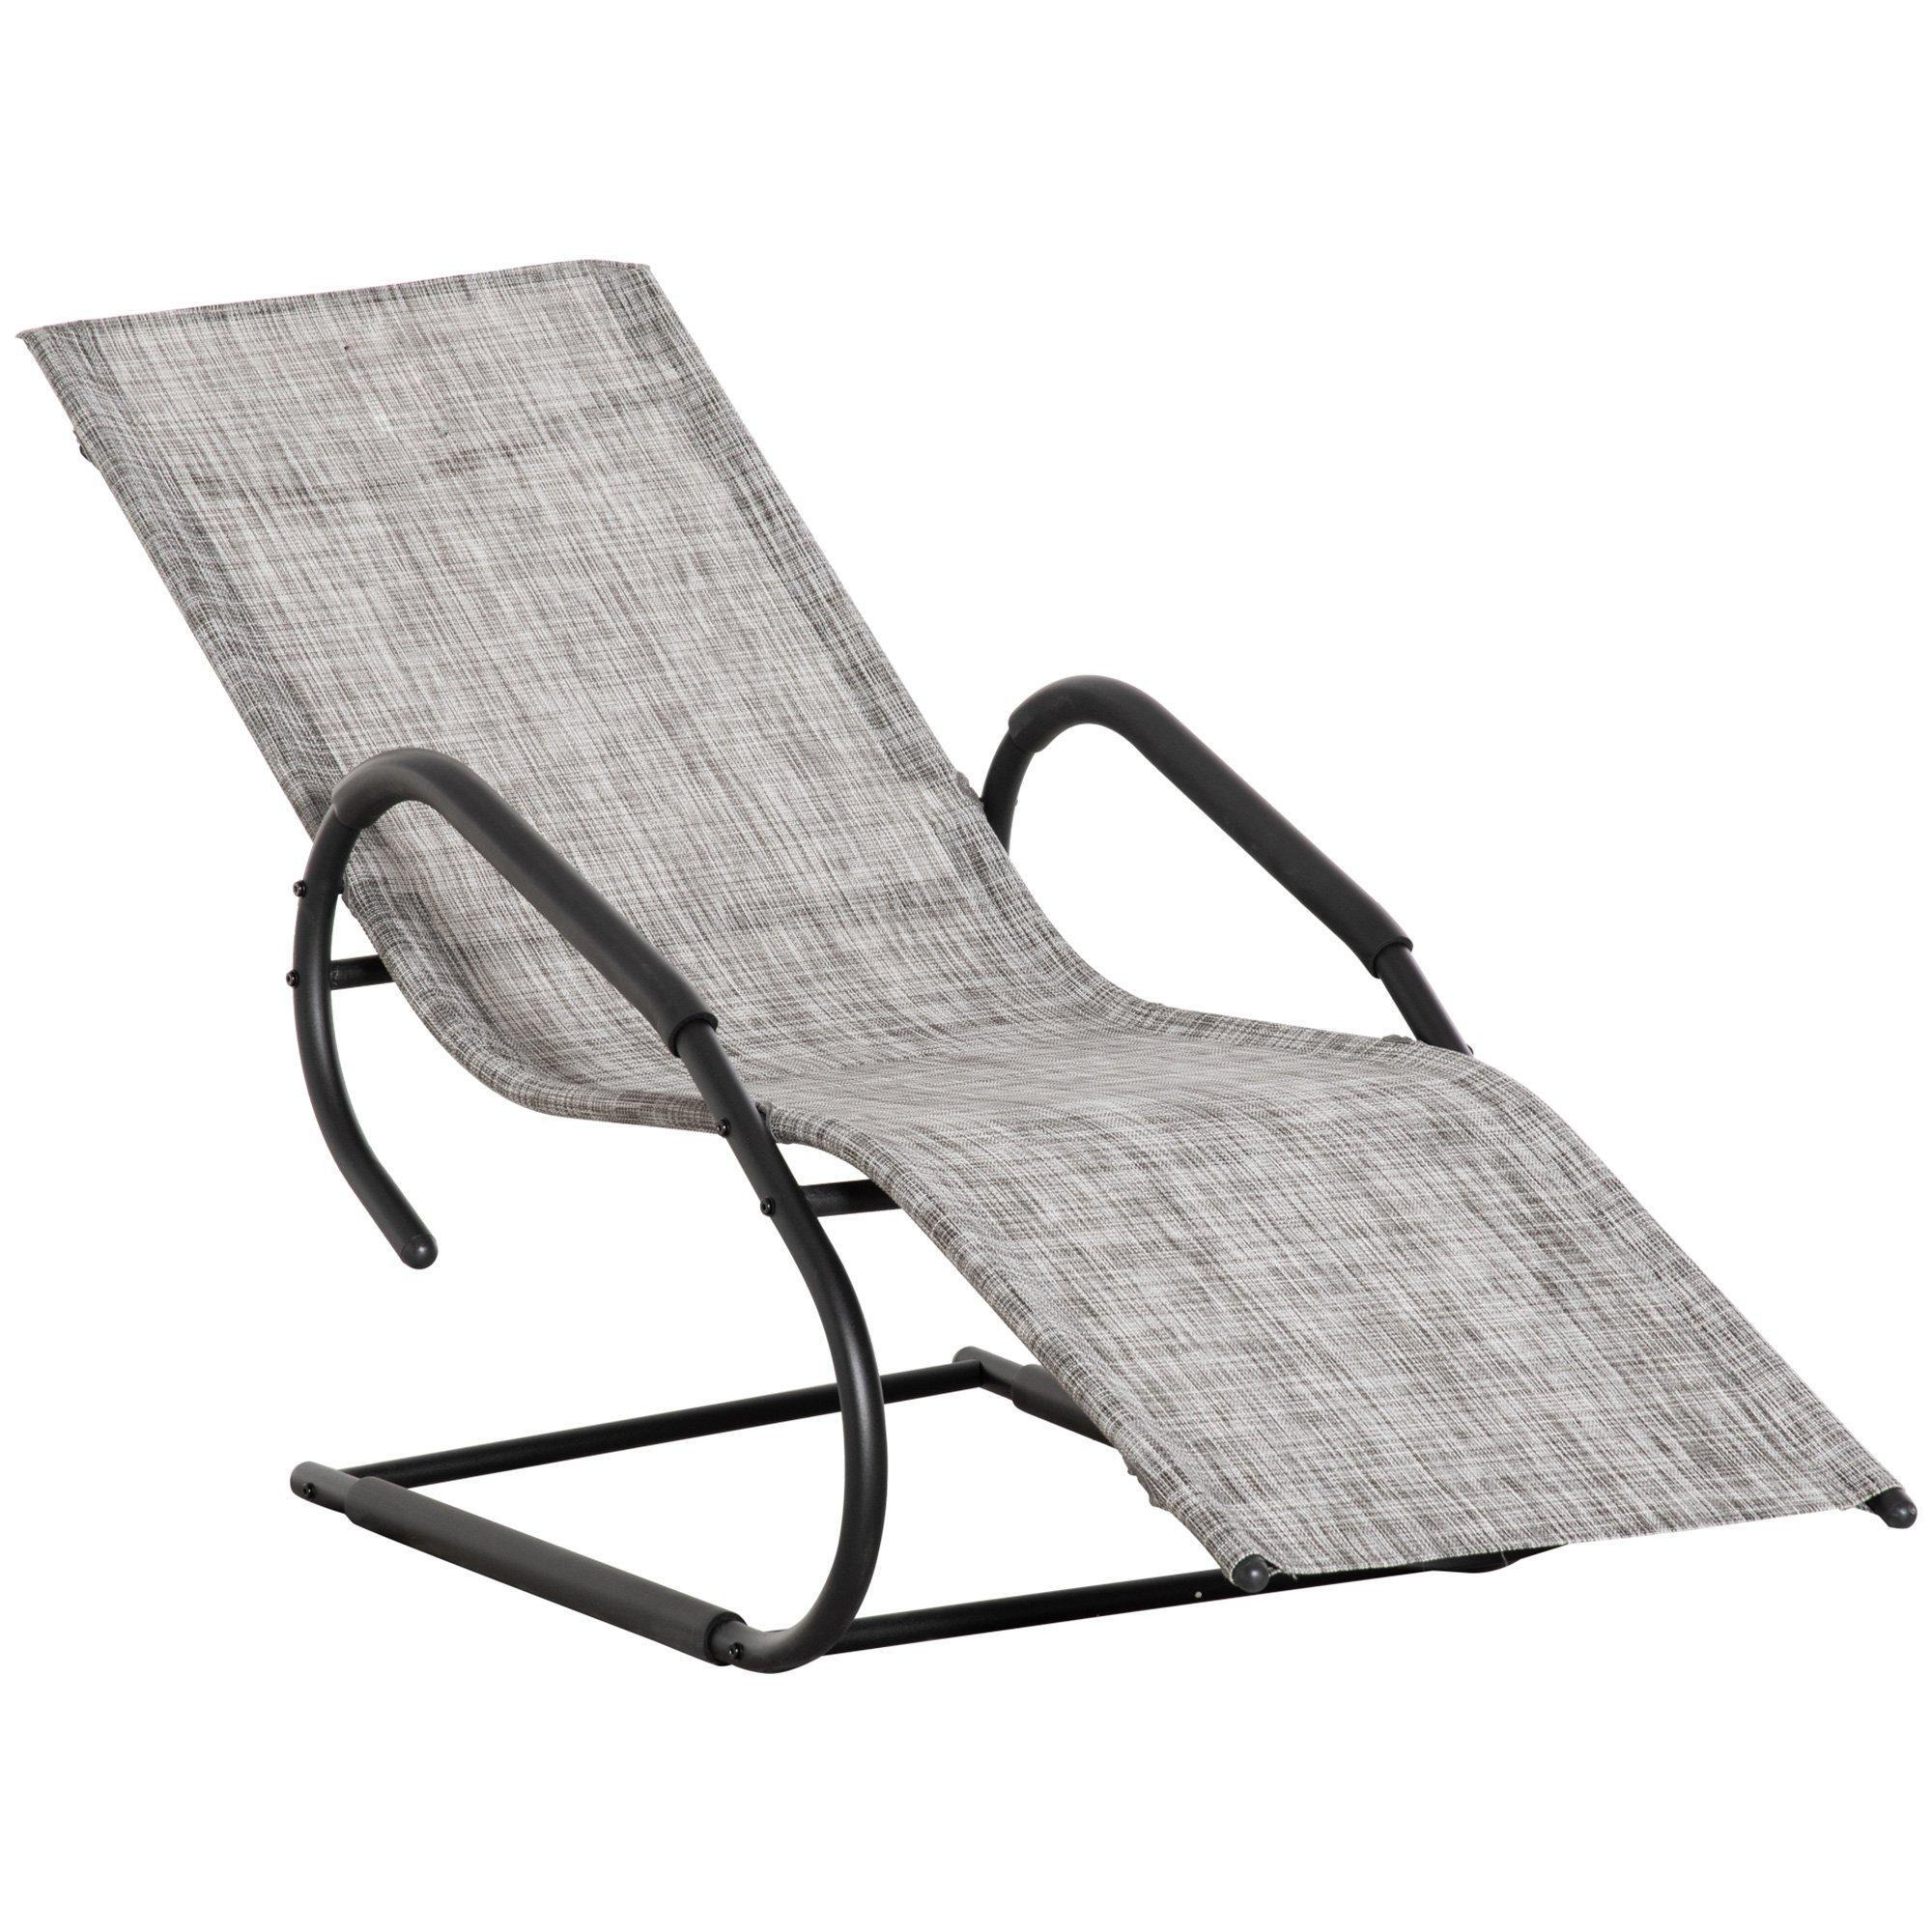 Outdoor Sun Lounger for Sunbathing, Reclining Rocking Chaise Chair - image 1